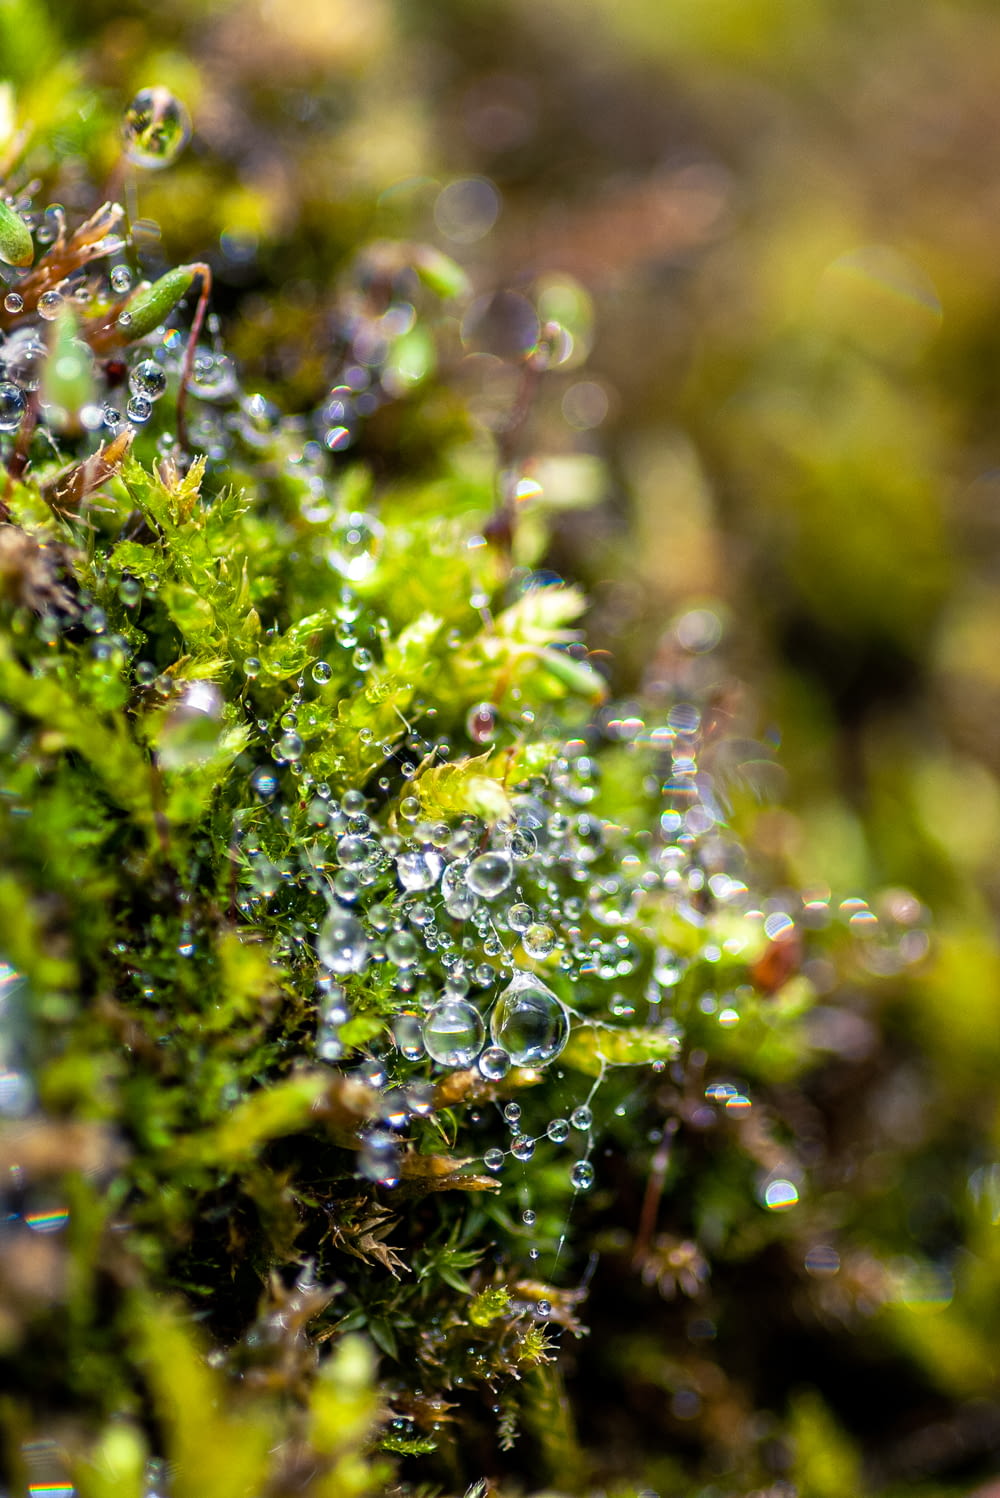 a close up of water droplets on a green plant